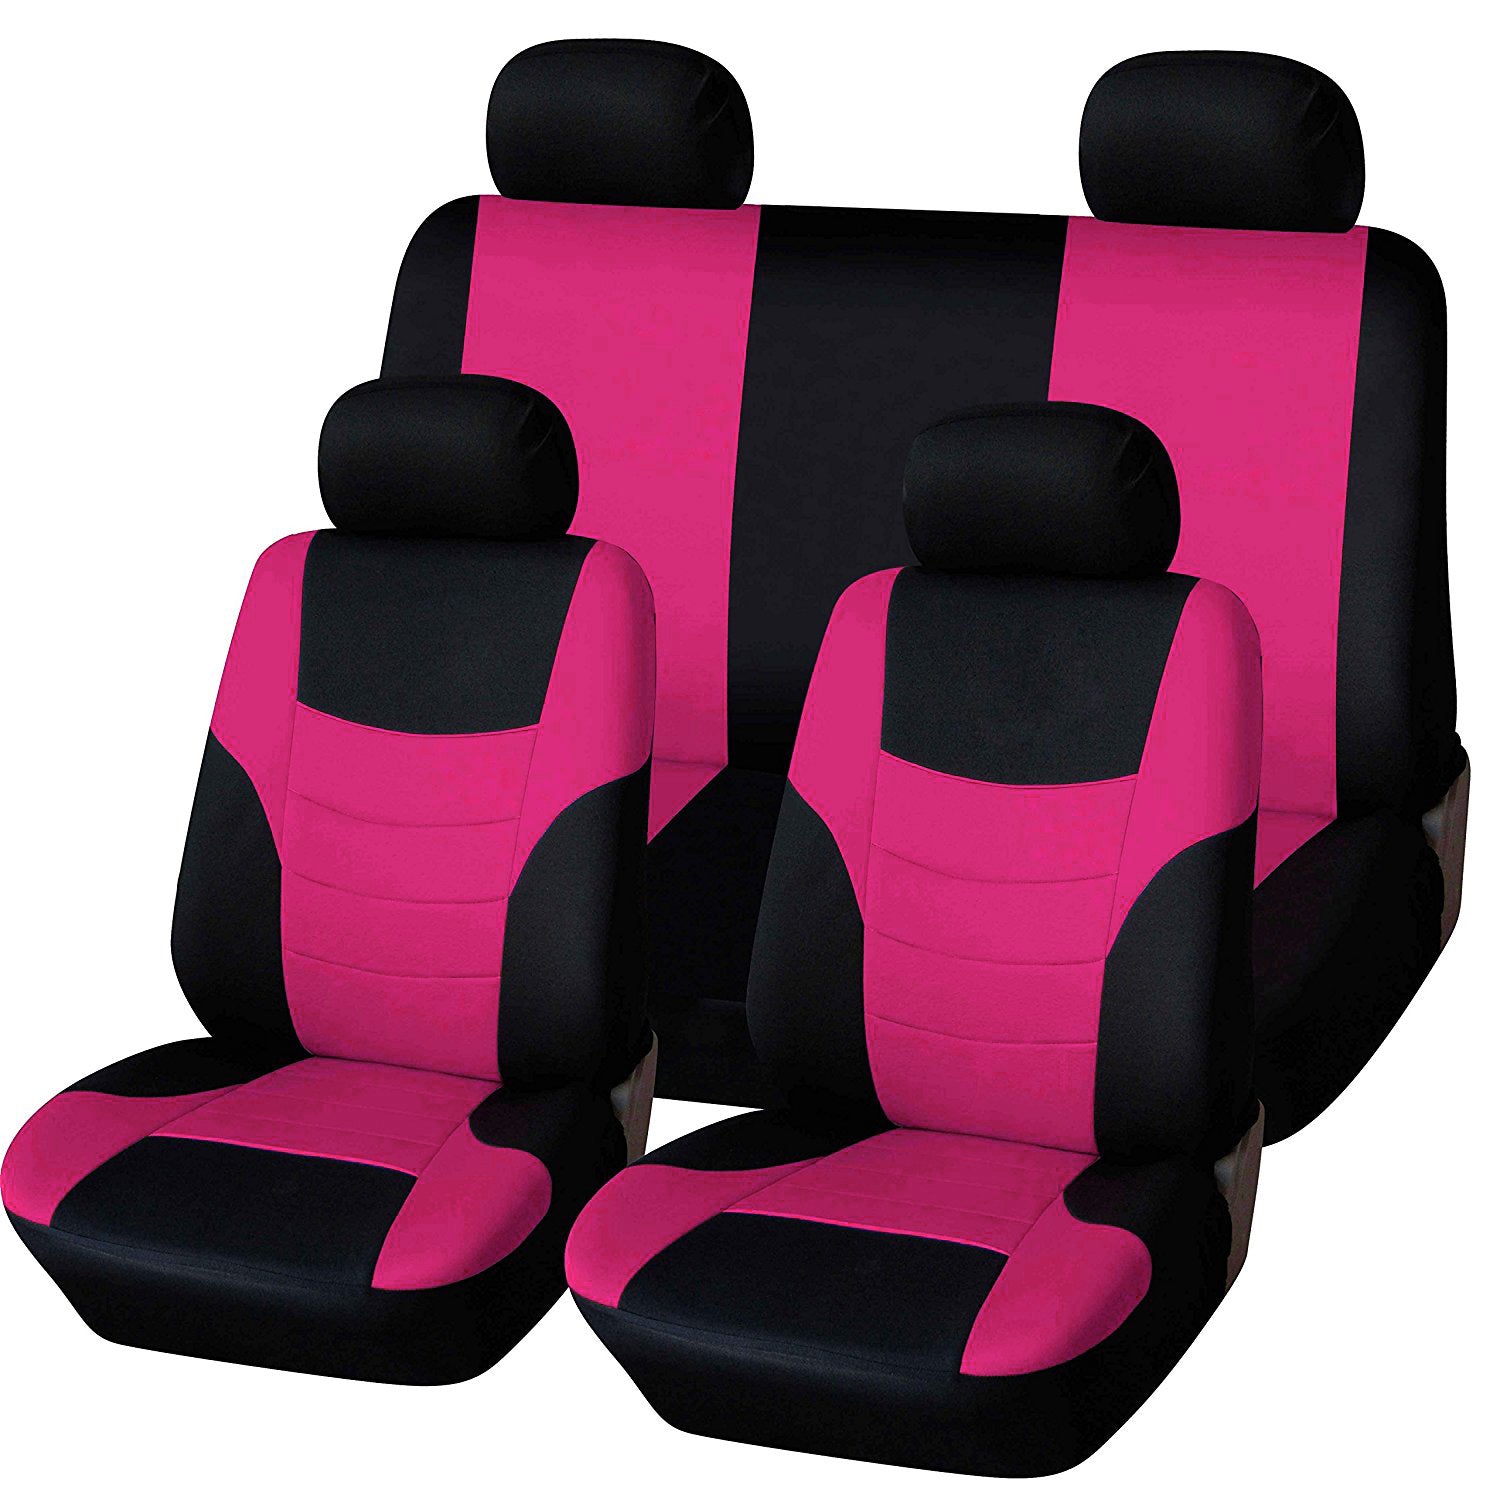 8Pcs Polyester Fabric Car Full Seat Cover Cushion Protector Set Front Rear 4 Heads Universal - Auto GoShop